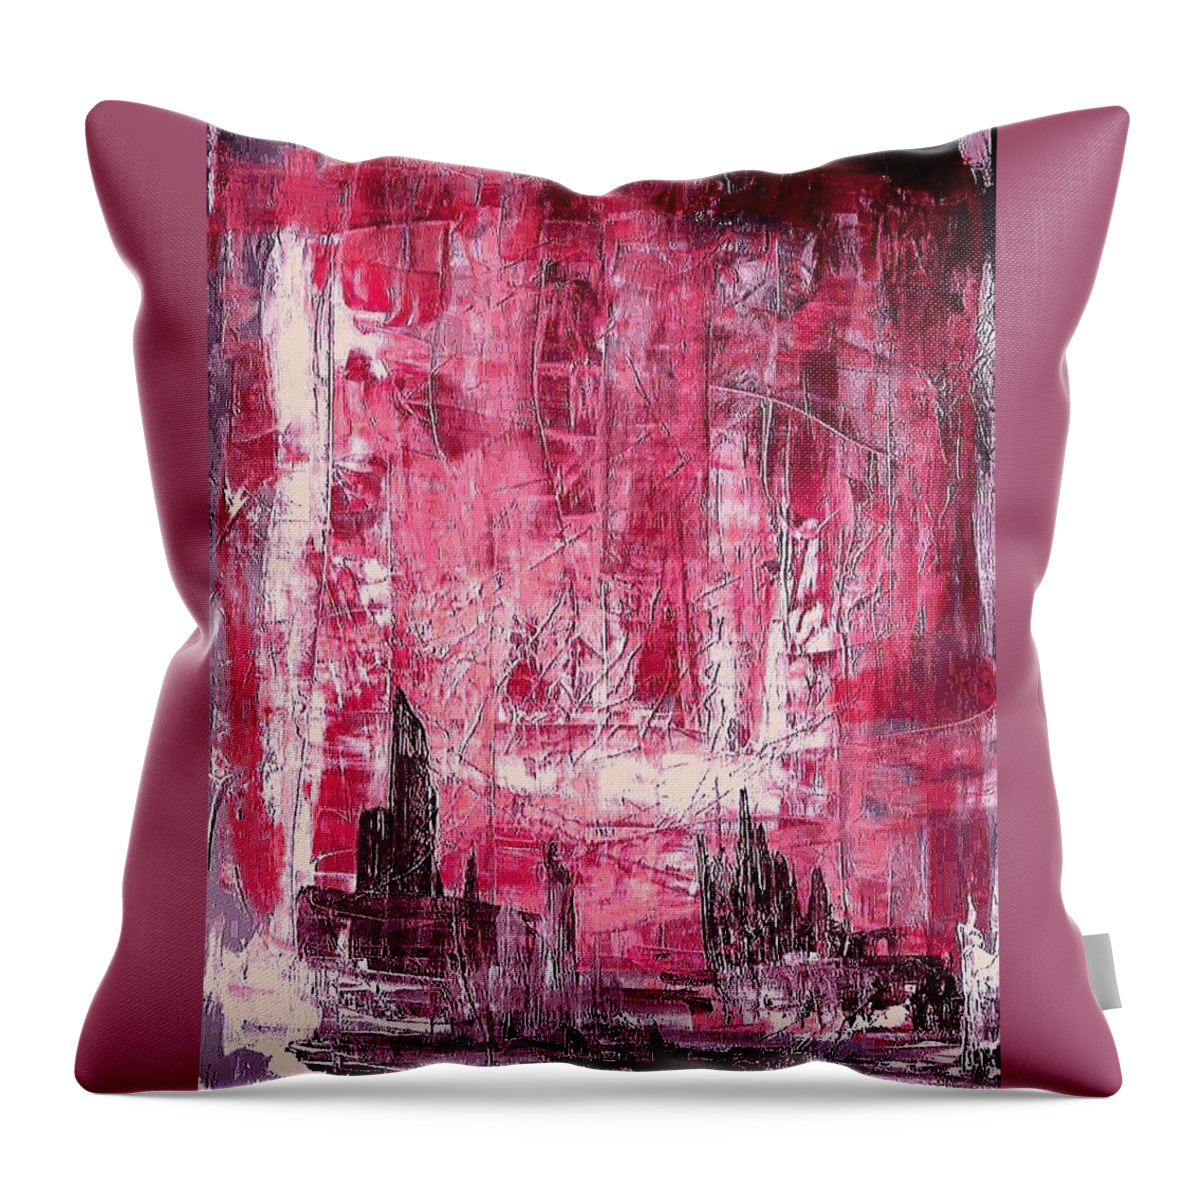  Throw Pillow featuring the painting D13 - christine II by KUNST MIT HERZ Art with heart